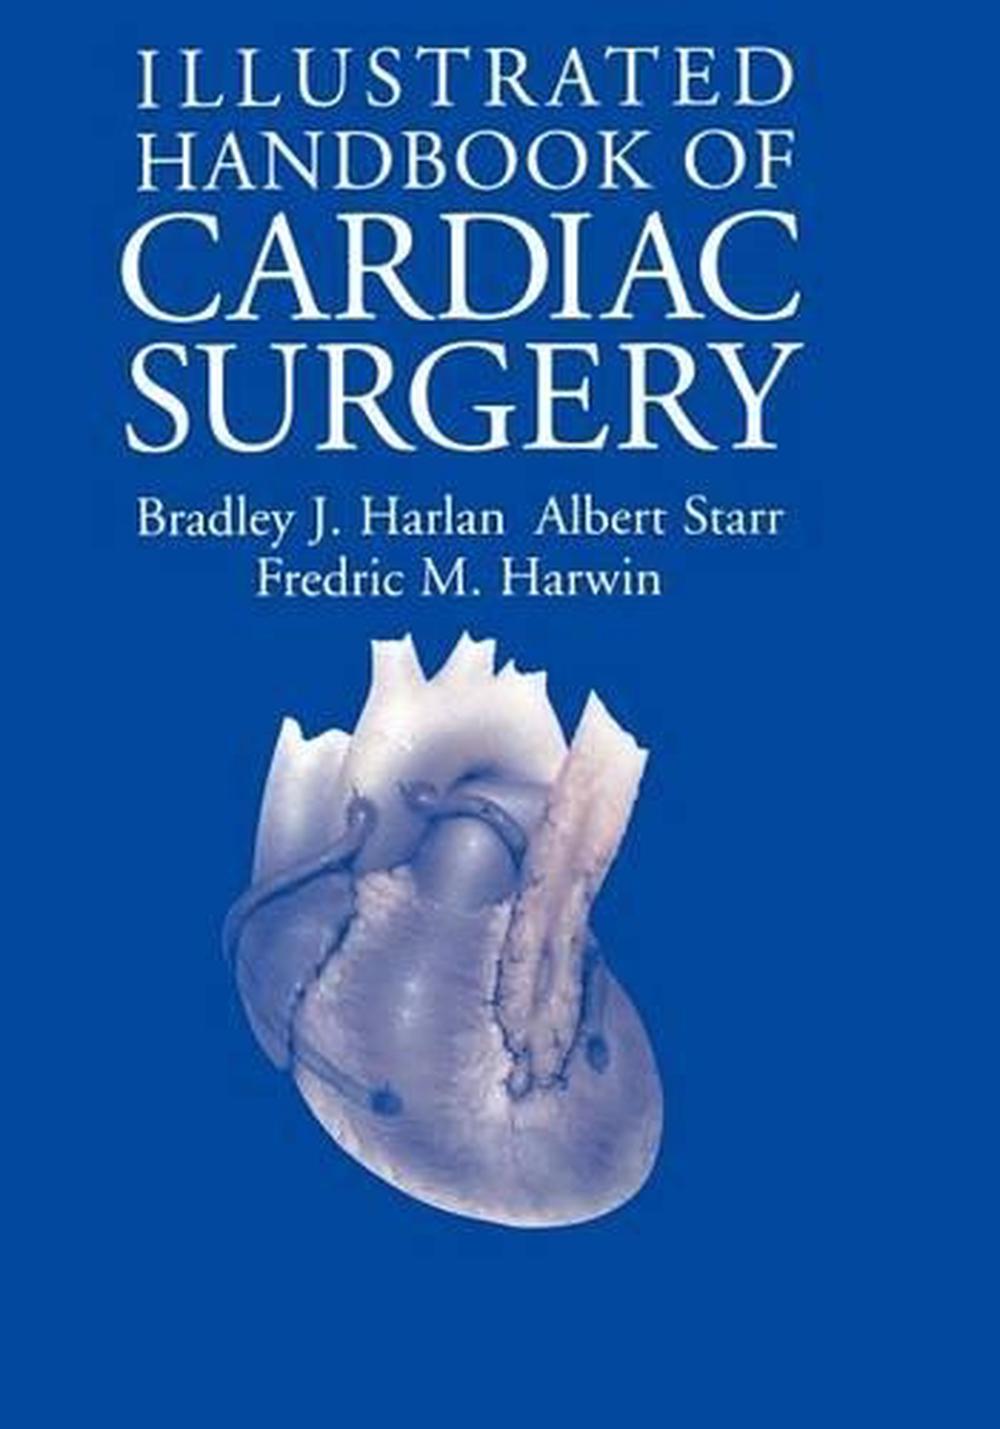 literature review on cardiac surgery